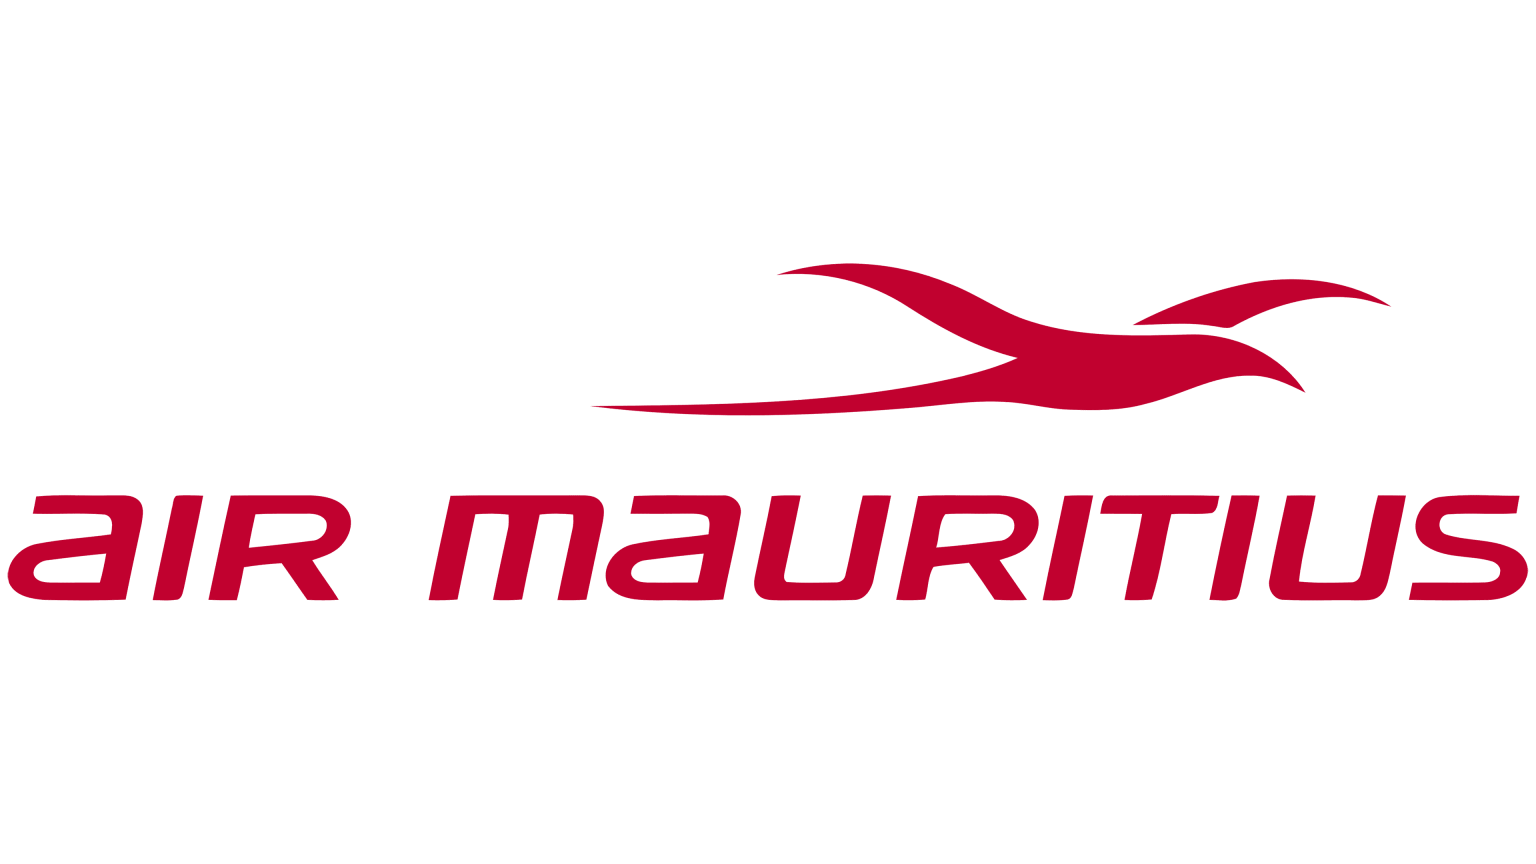 Air Mauritius Logo Download In Svg Vector Format Or In Png Format